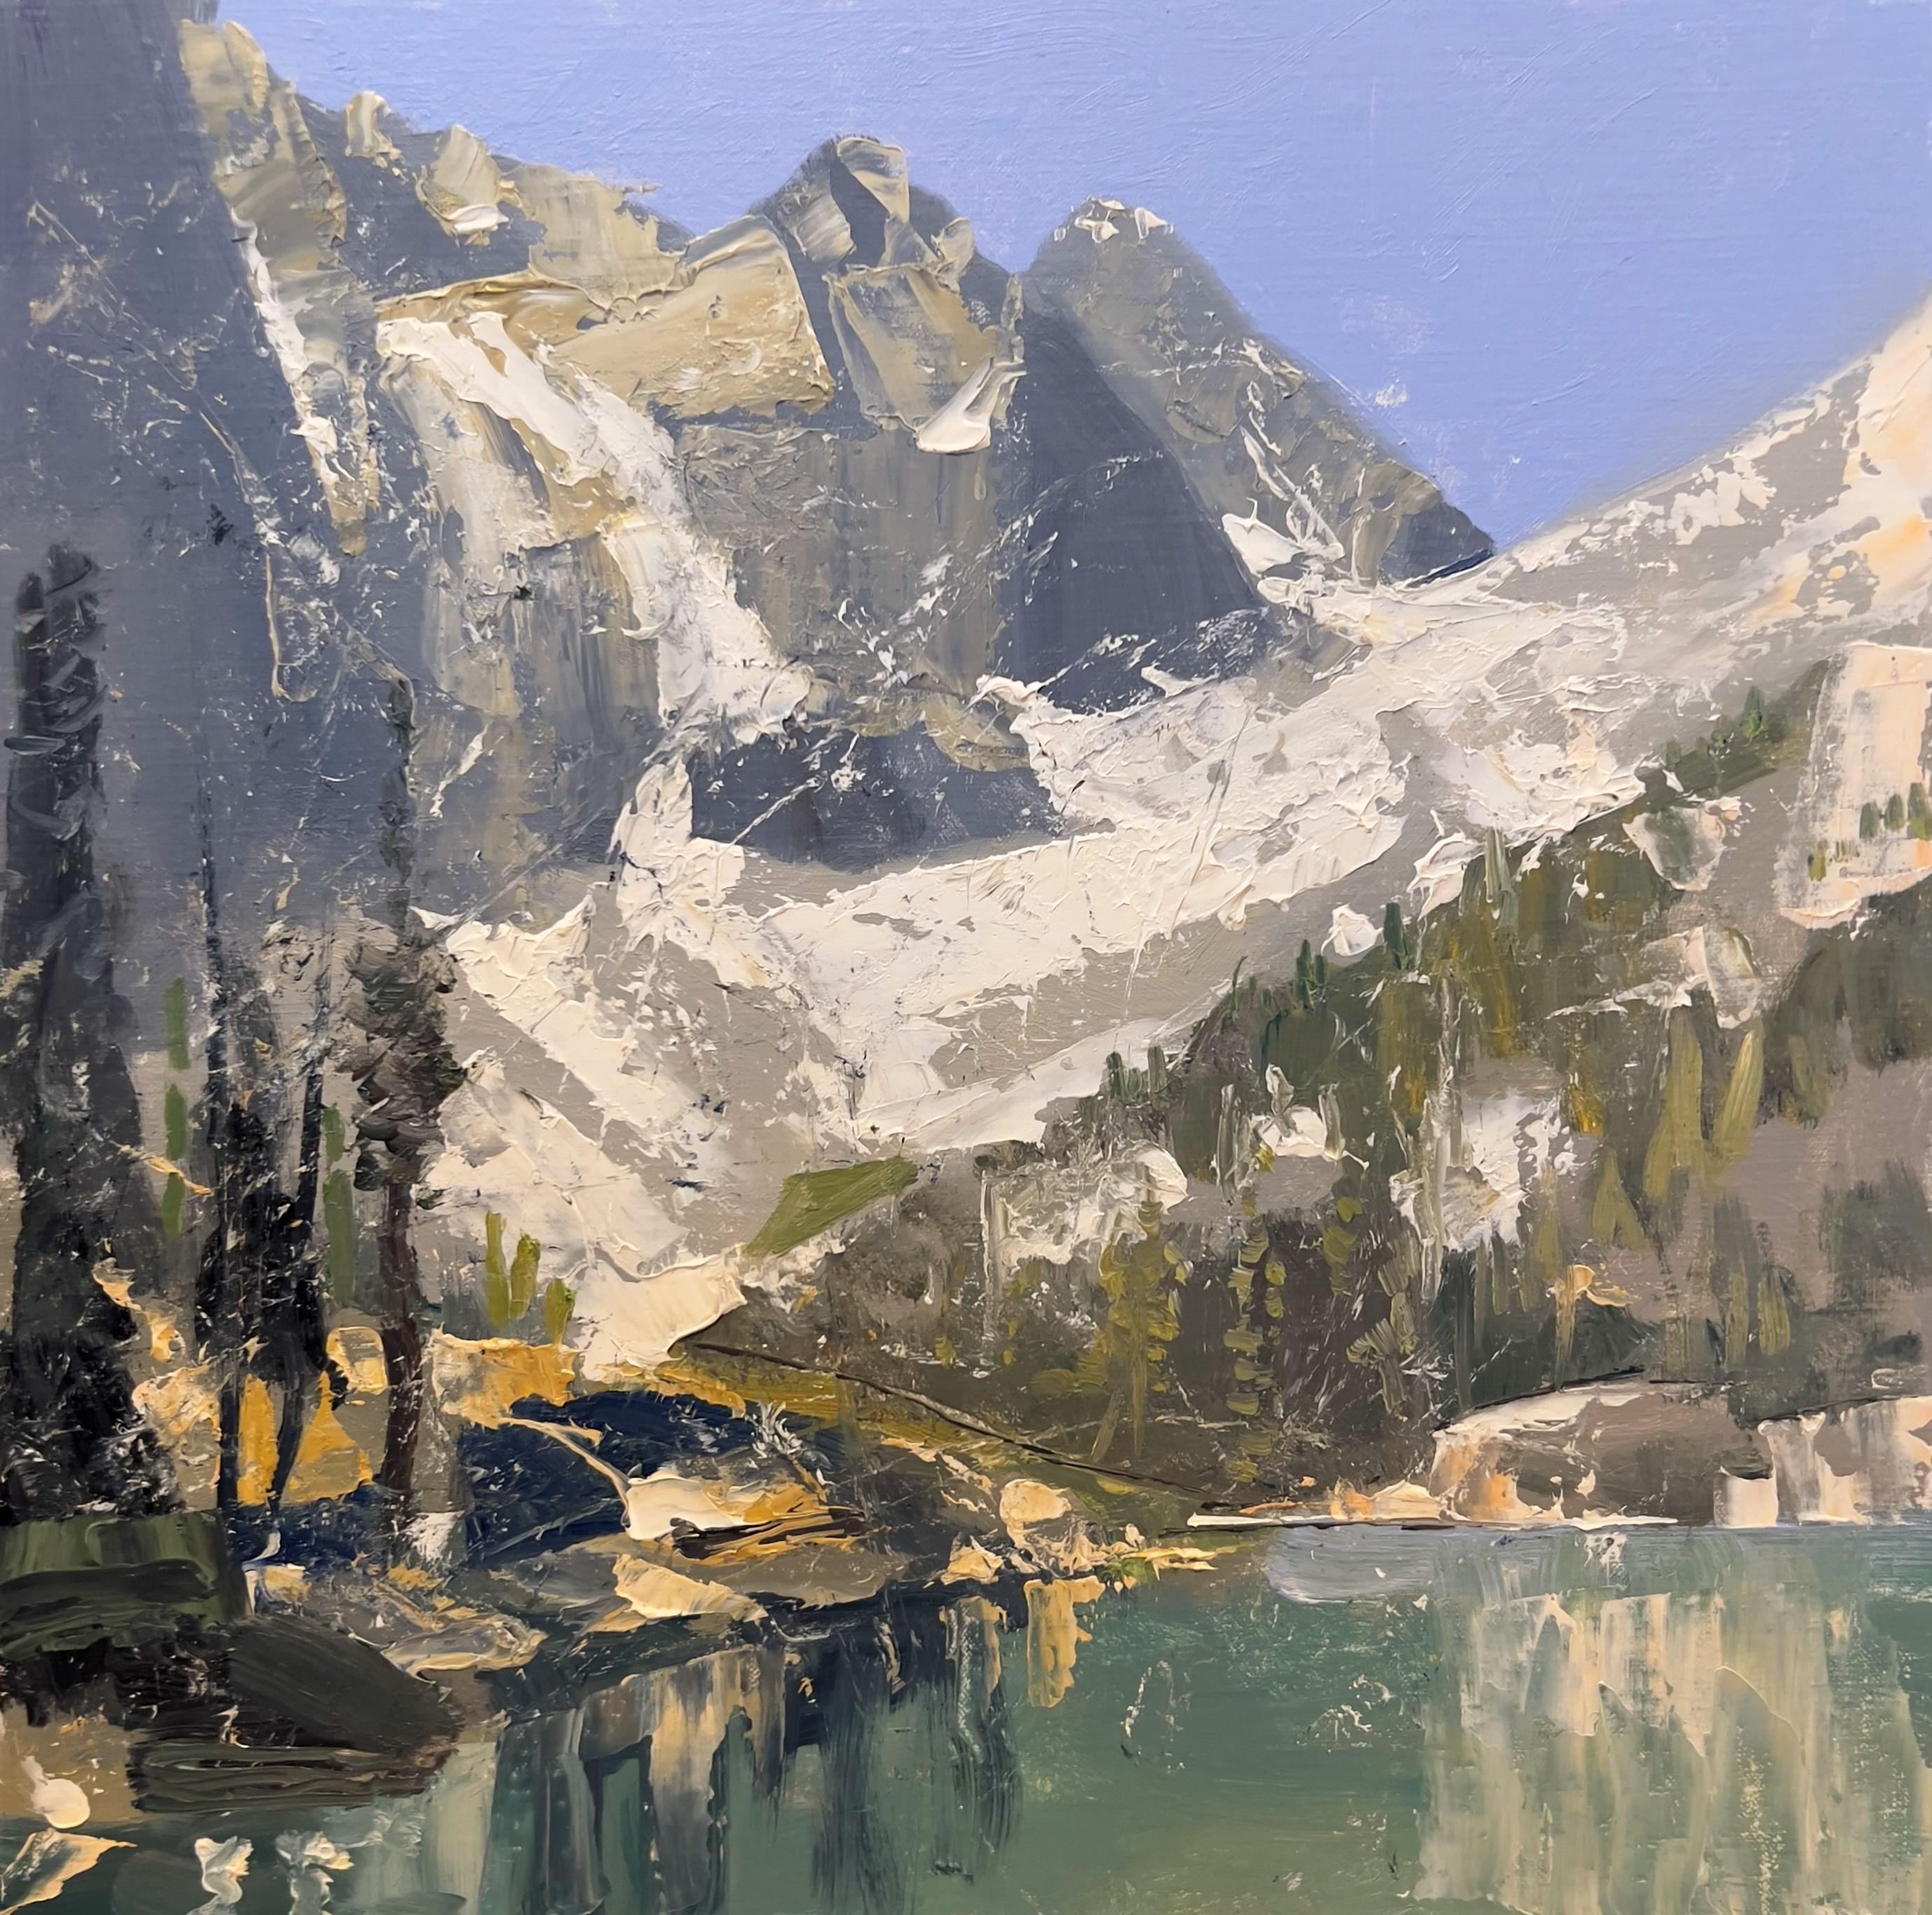 C.W. Mundy Landscape Painting - "The High Sierras, " Oil Painting